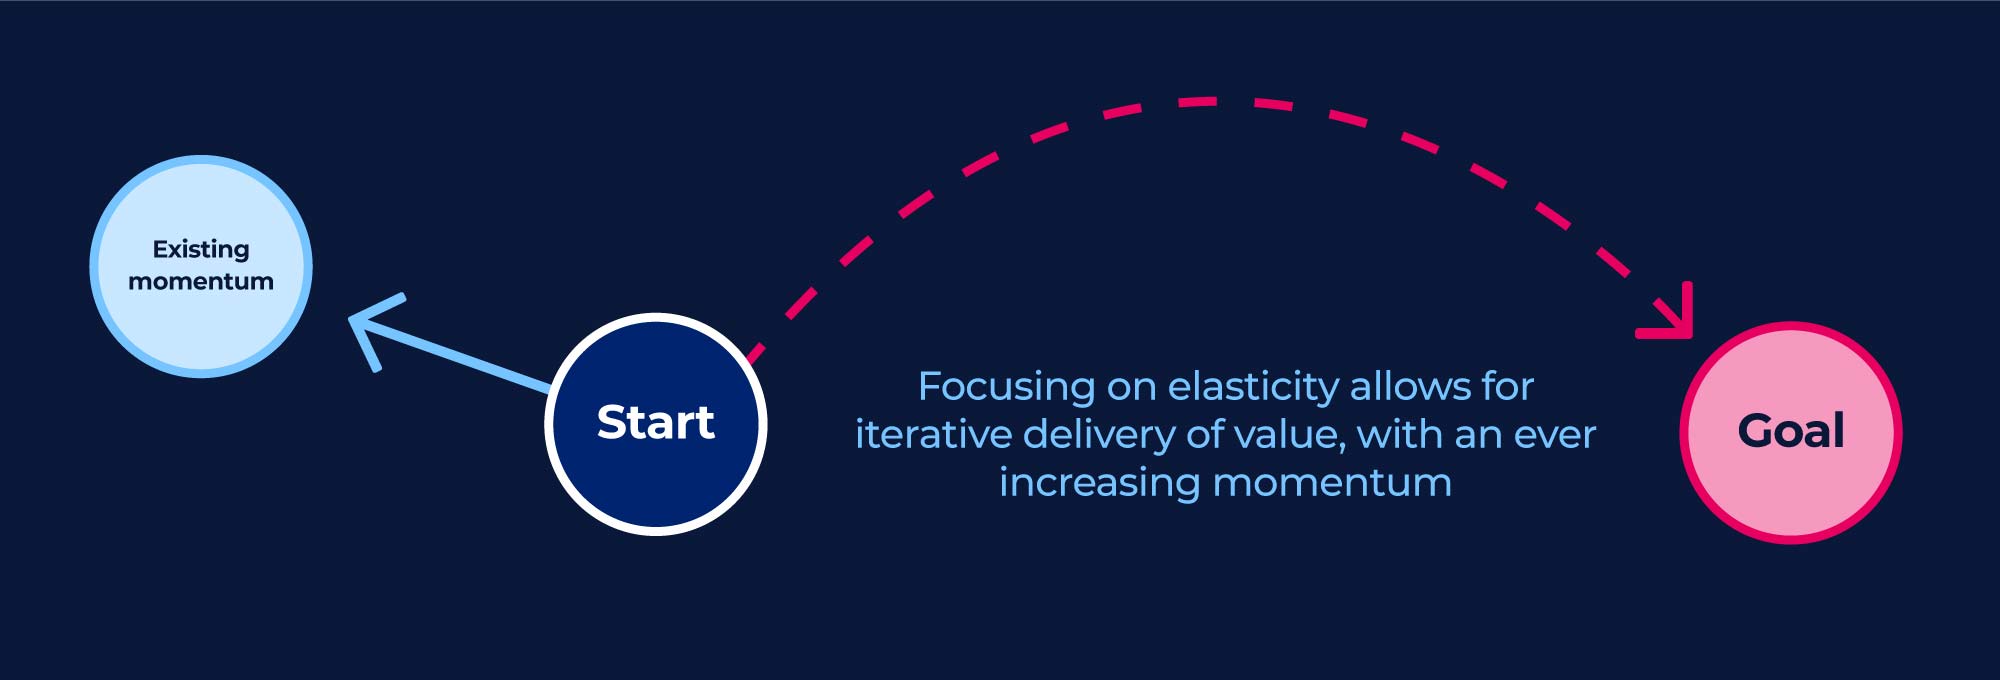 Focusing on elasticity allows for iterative delivery of value, with an ever increasing momentum